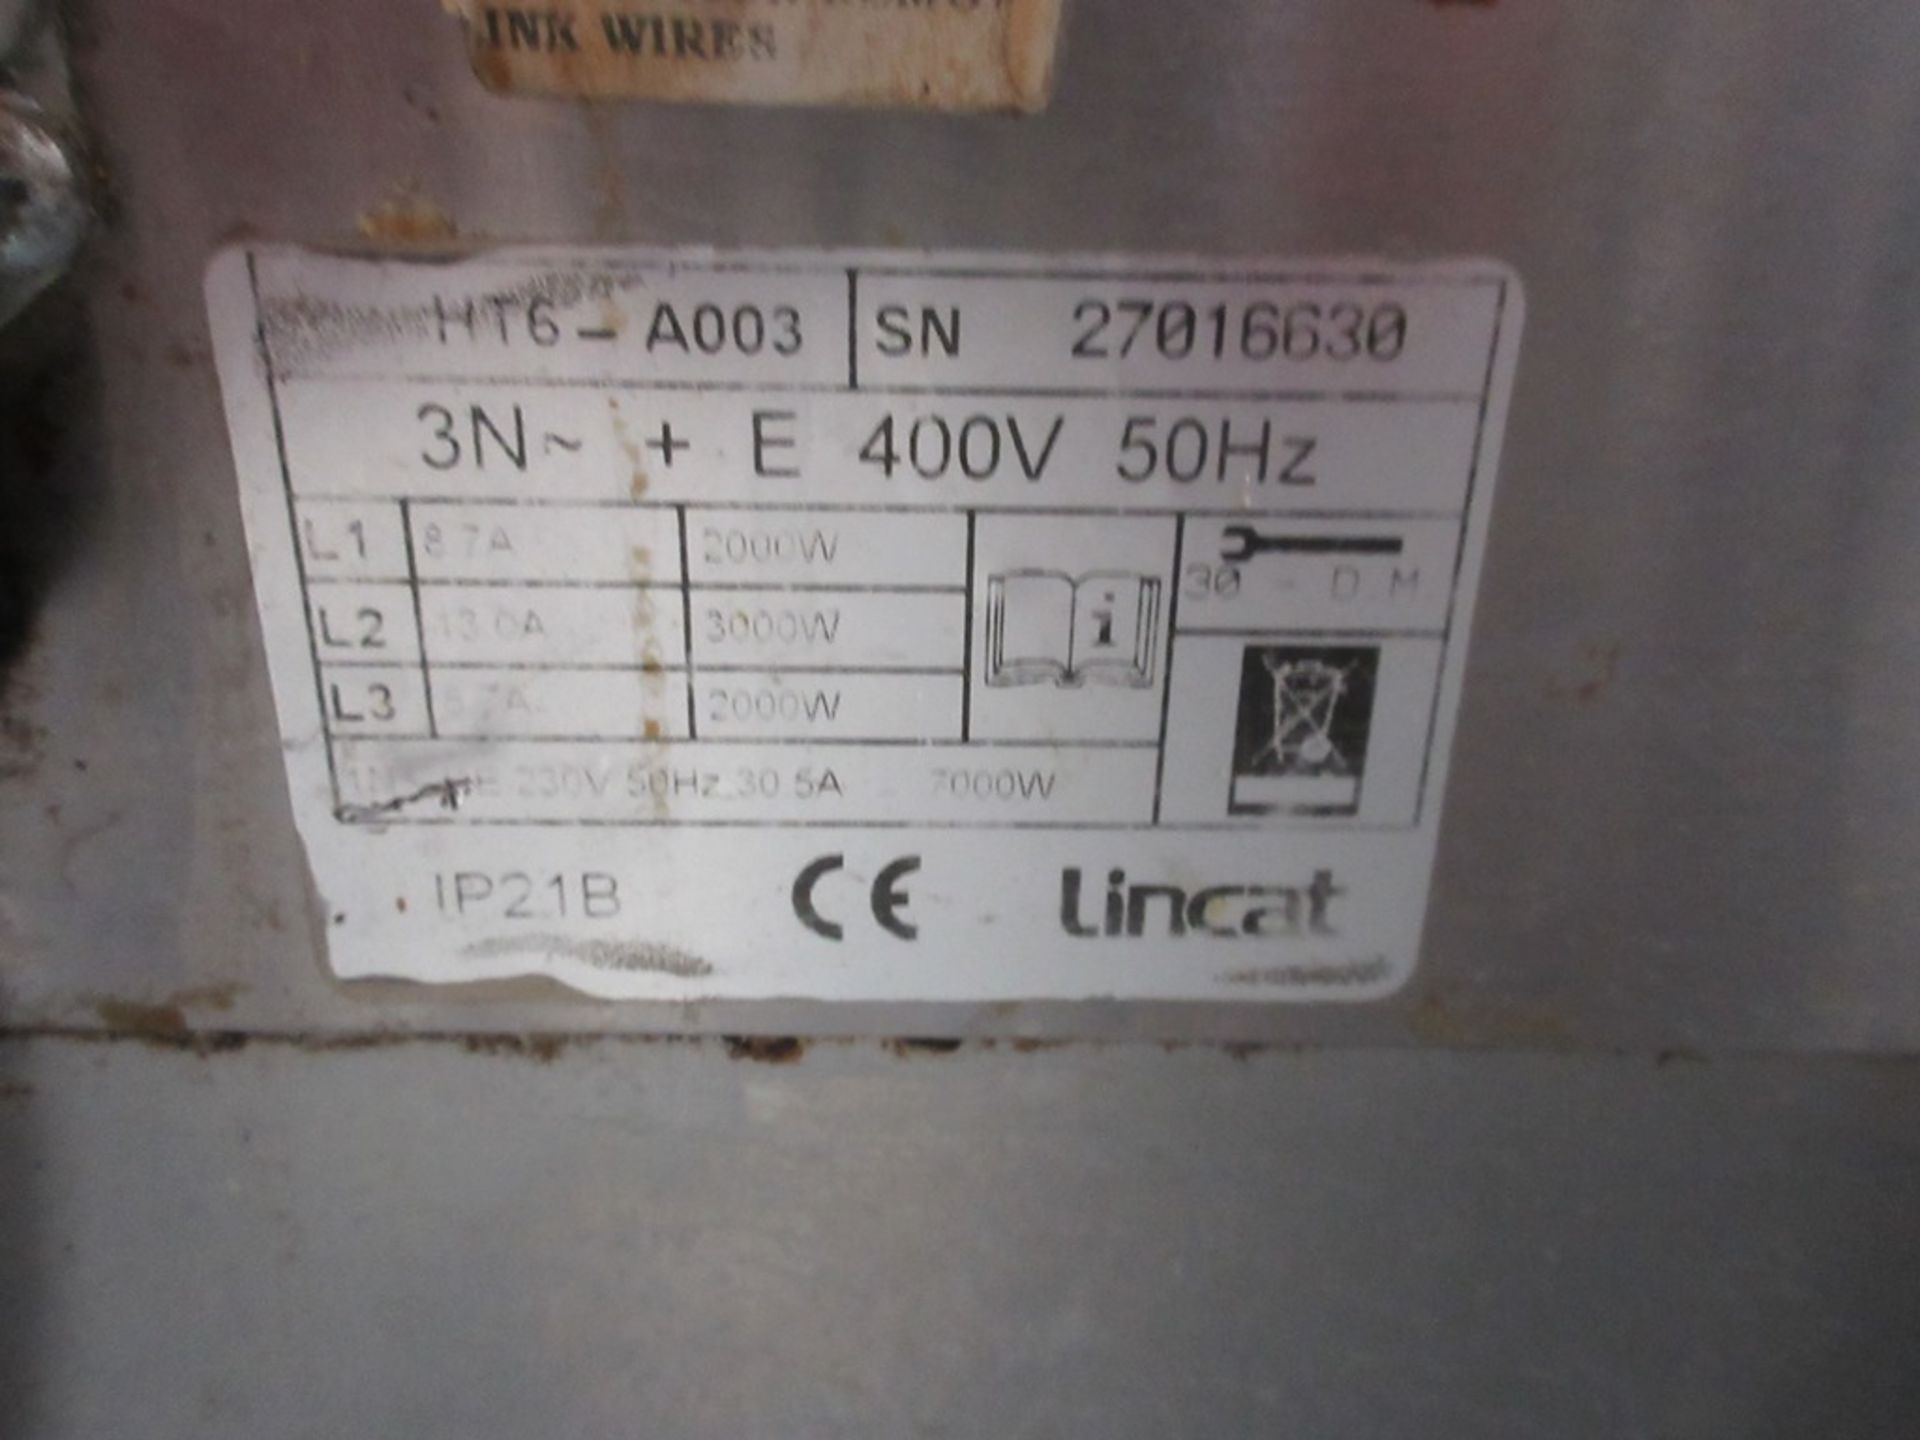 Lincat stainless steel 4 ring electric hob, Model HT6-A003, serial no. 27016630, approx. size: 600mm - Image 4 of 6